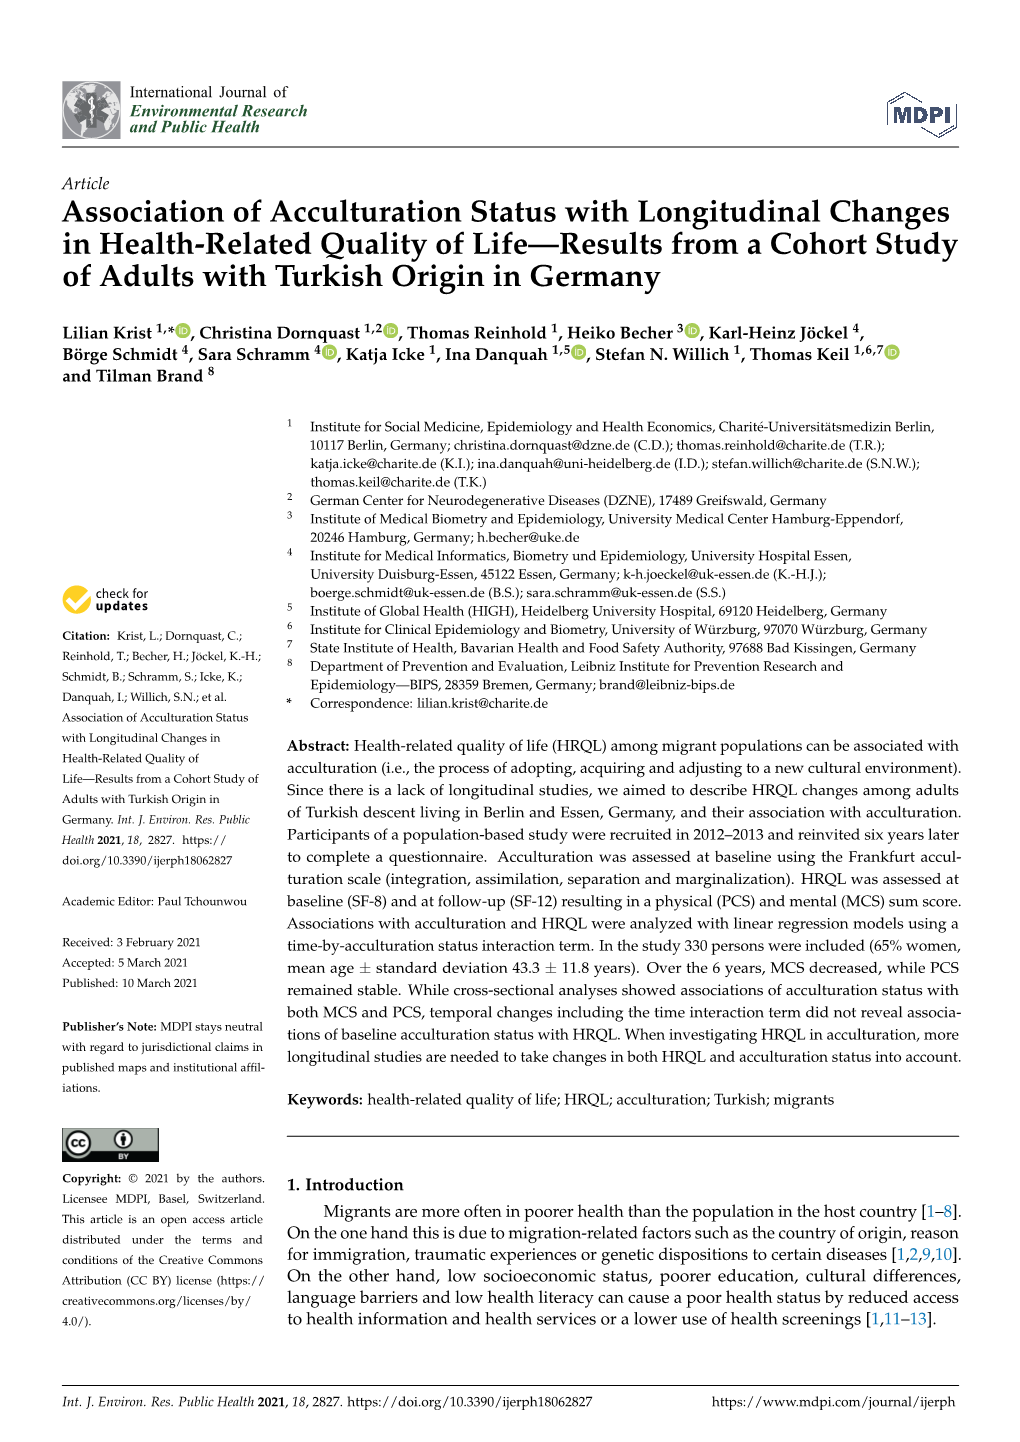 Association of Acculturation Status with Longitudinal Changes in Health-Related Quality of Life—Results from a Cohort Study of Adults with Turkish Origin in Germany